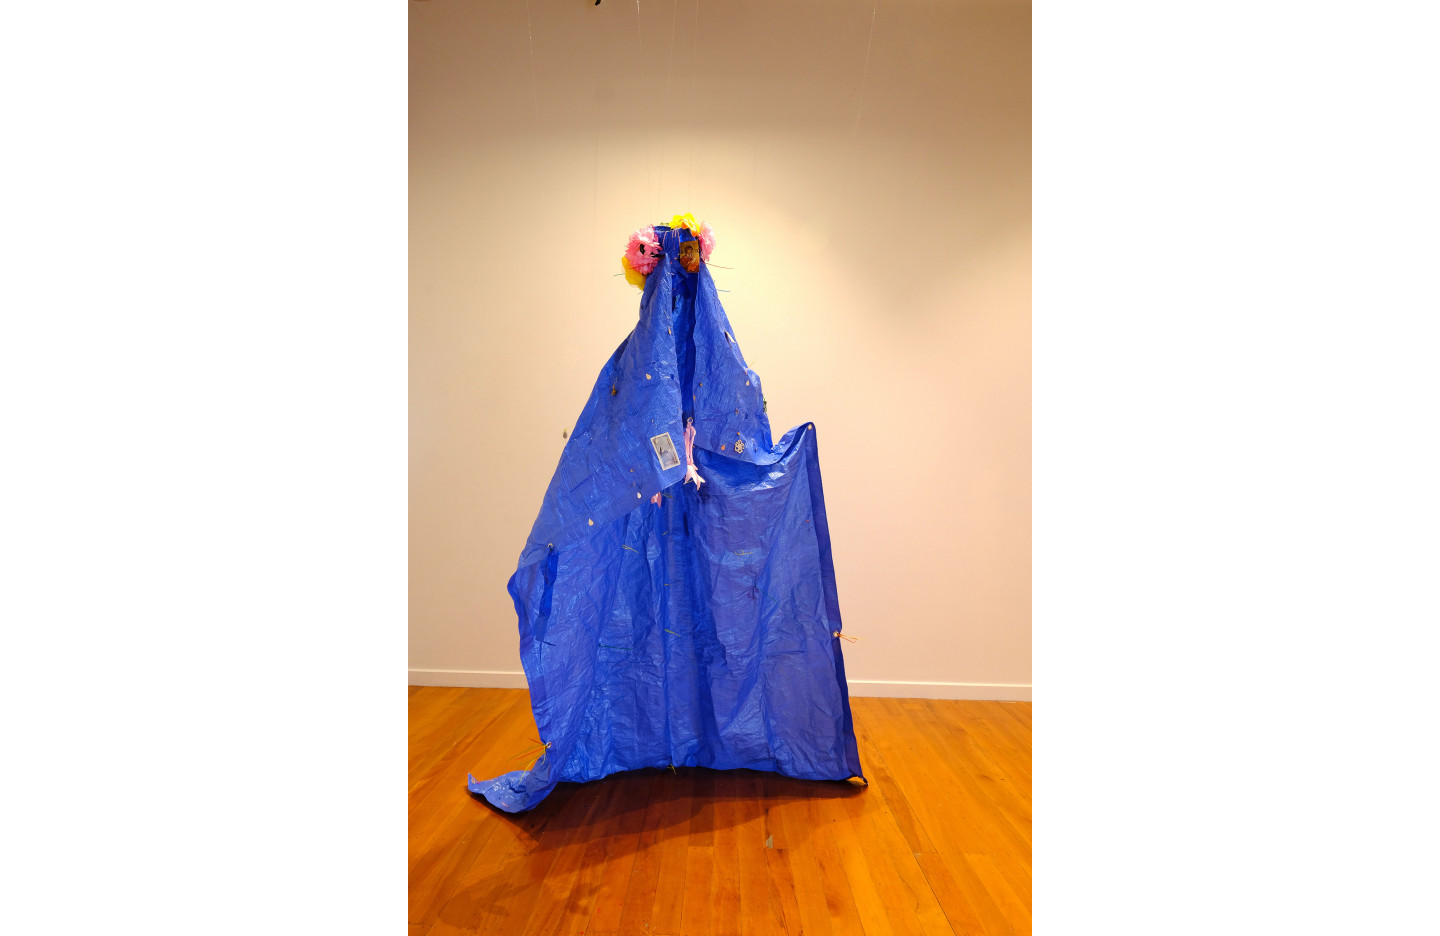 Lefa Wilson, Remnant of Priest Performance (2015). Sleight Of Hand installation view, 2018